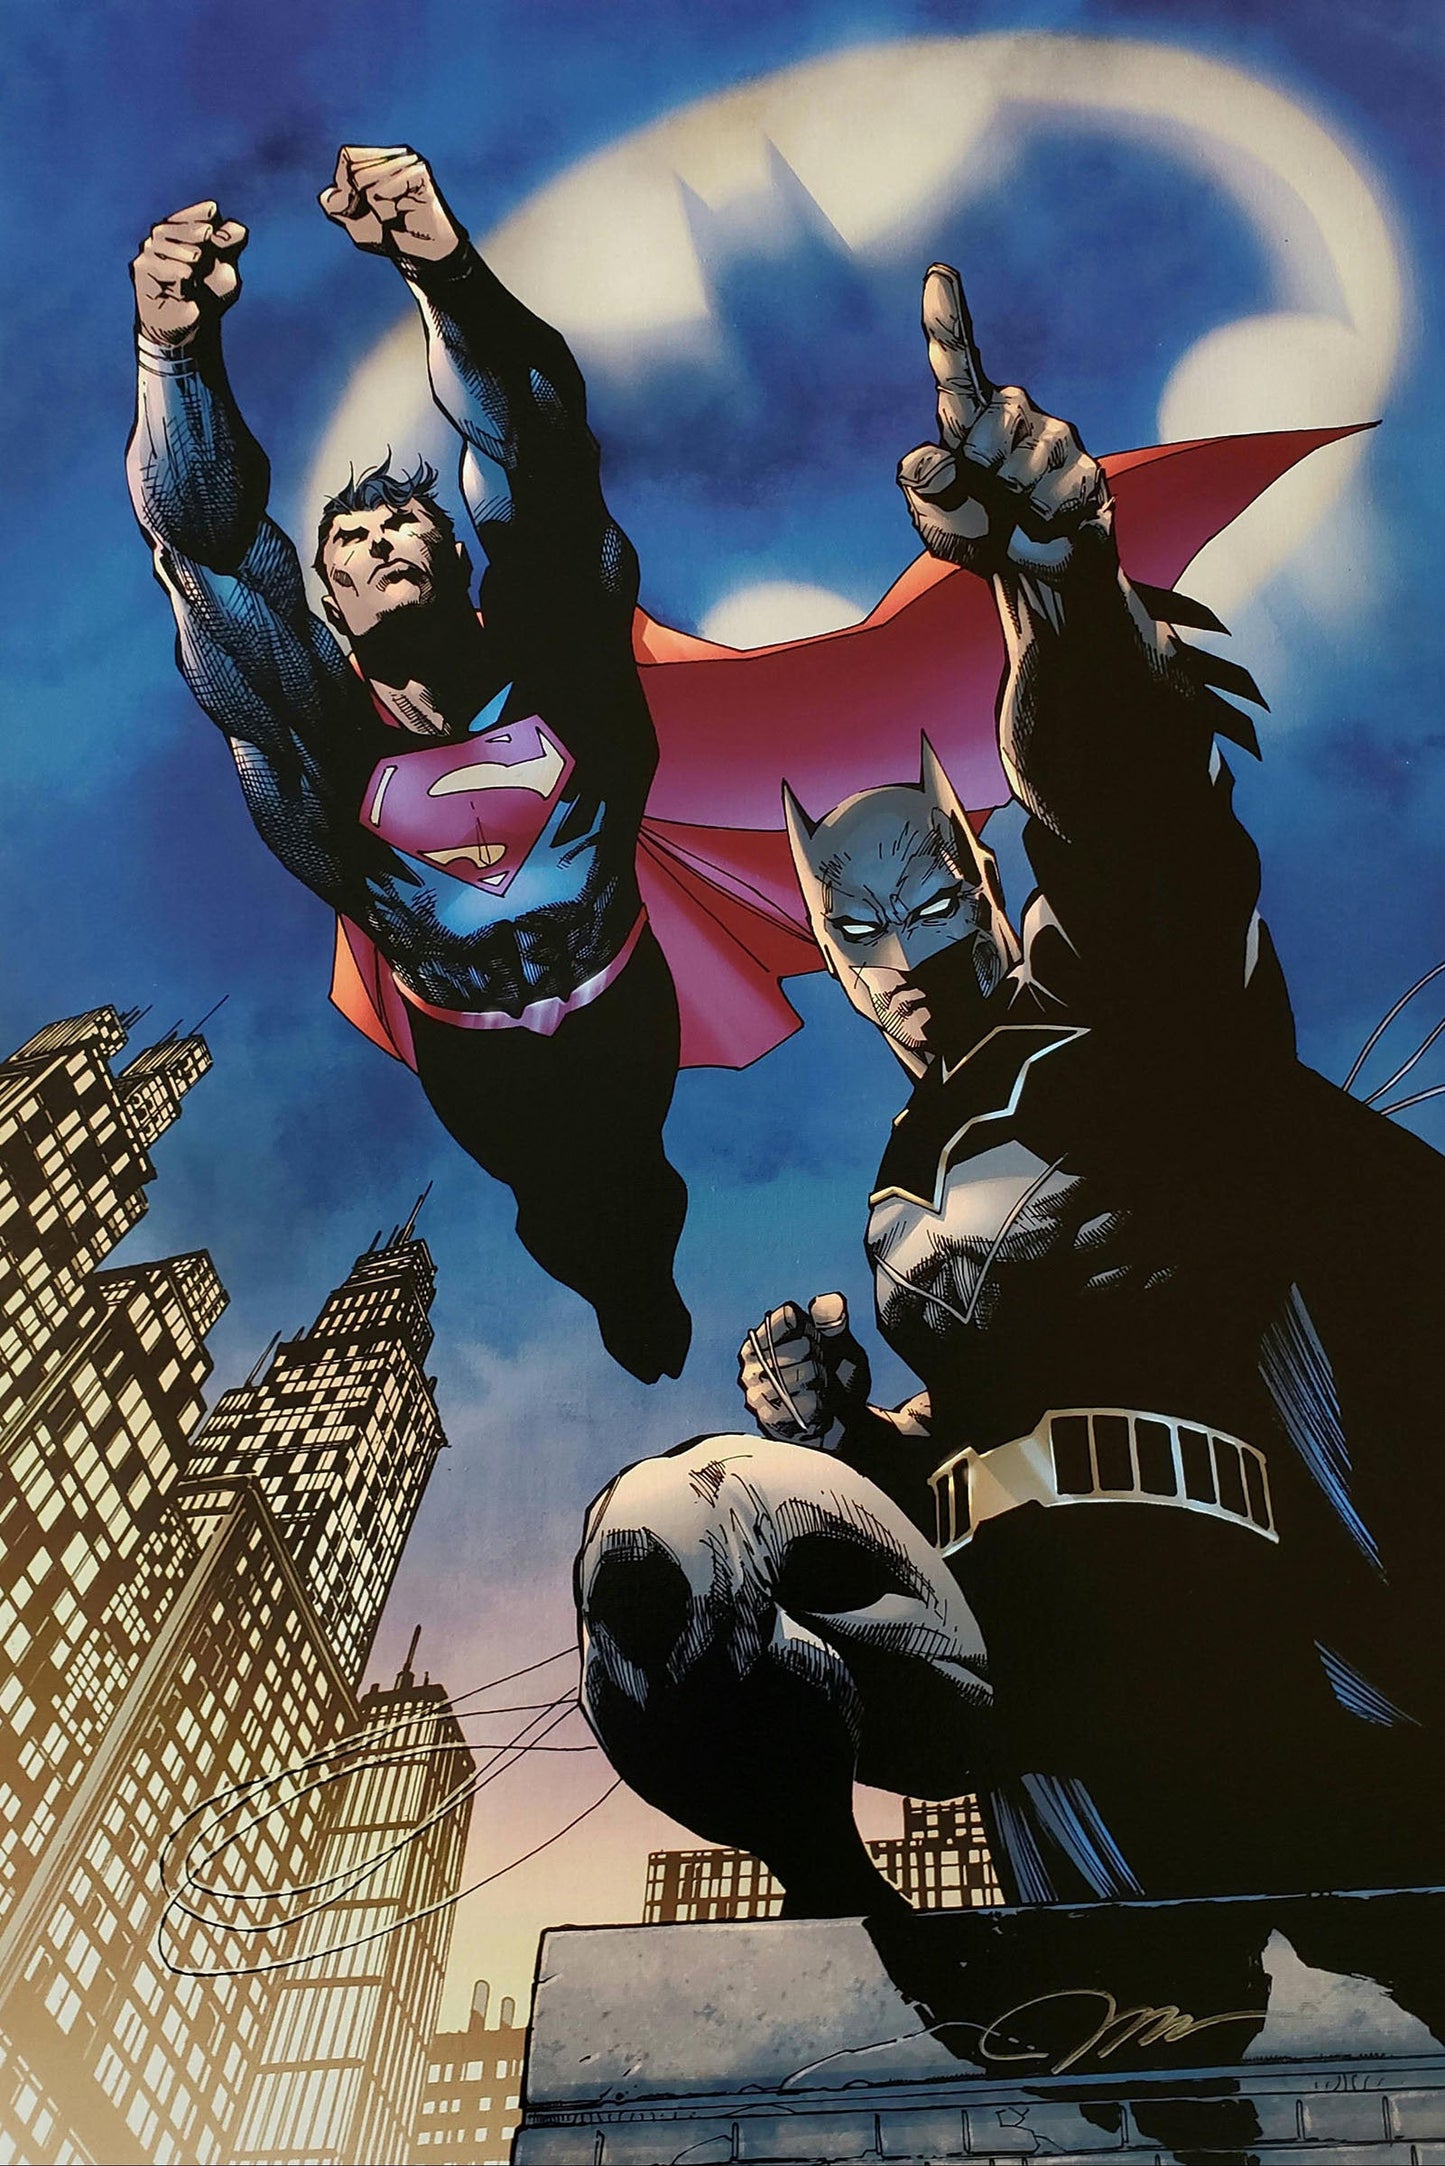 Jim Lee Signed Batman Superman Heroes Unite DC Giclee on Paper Limited Edition of 250 for the 80th Anniversary